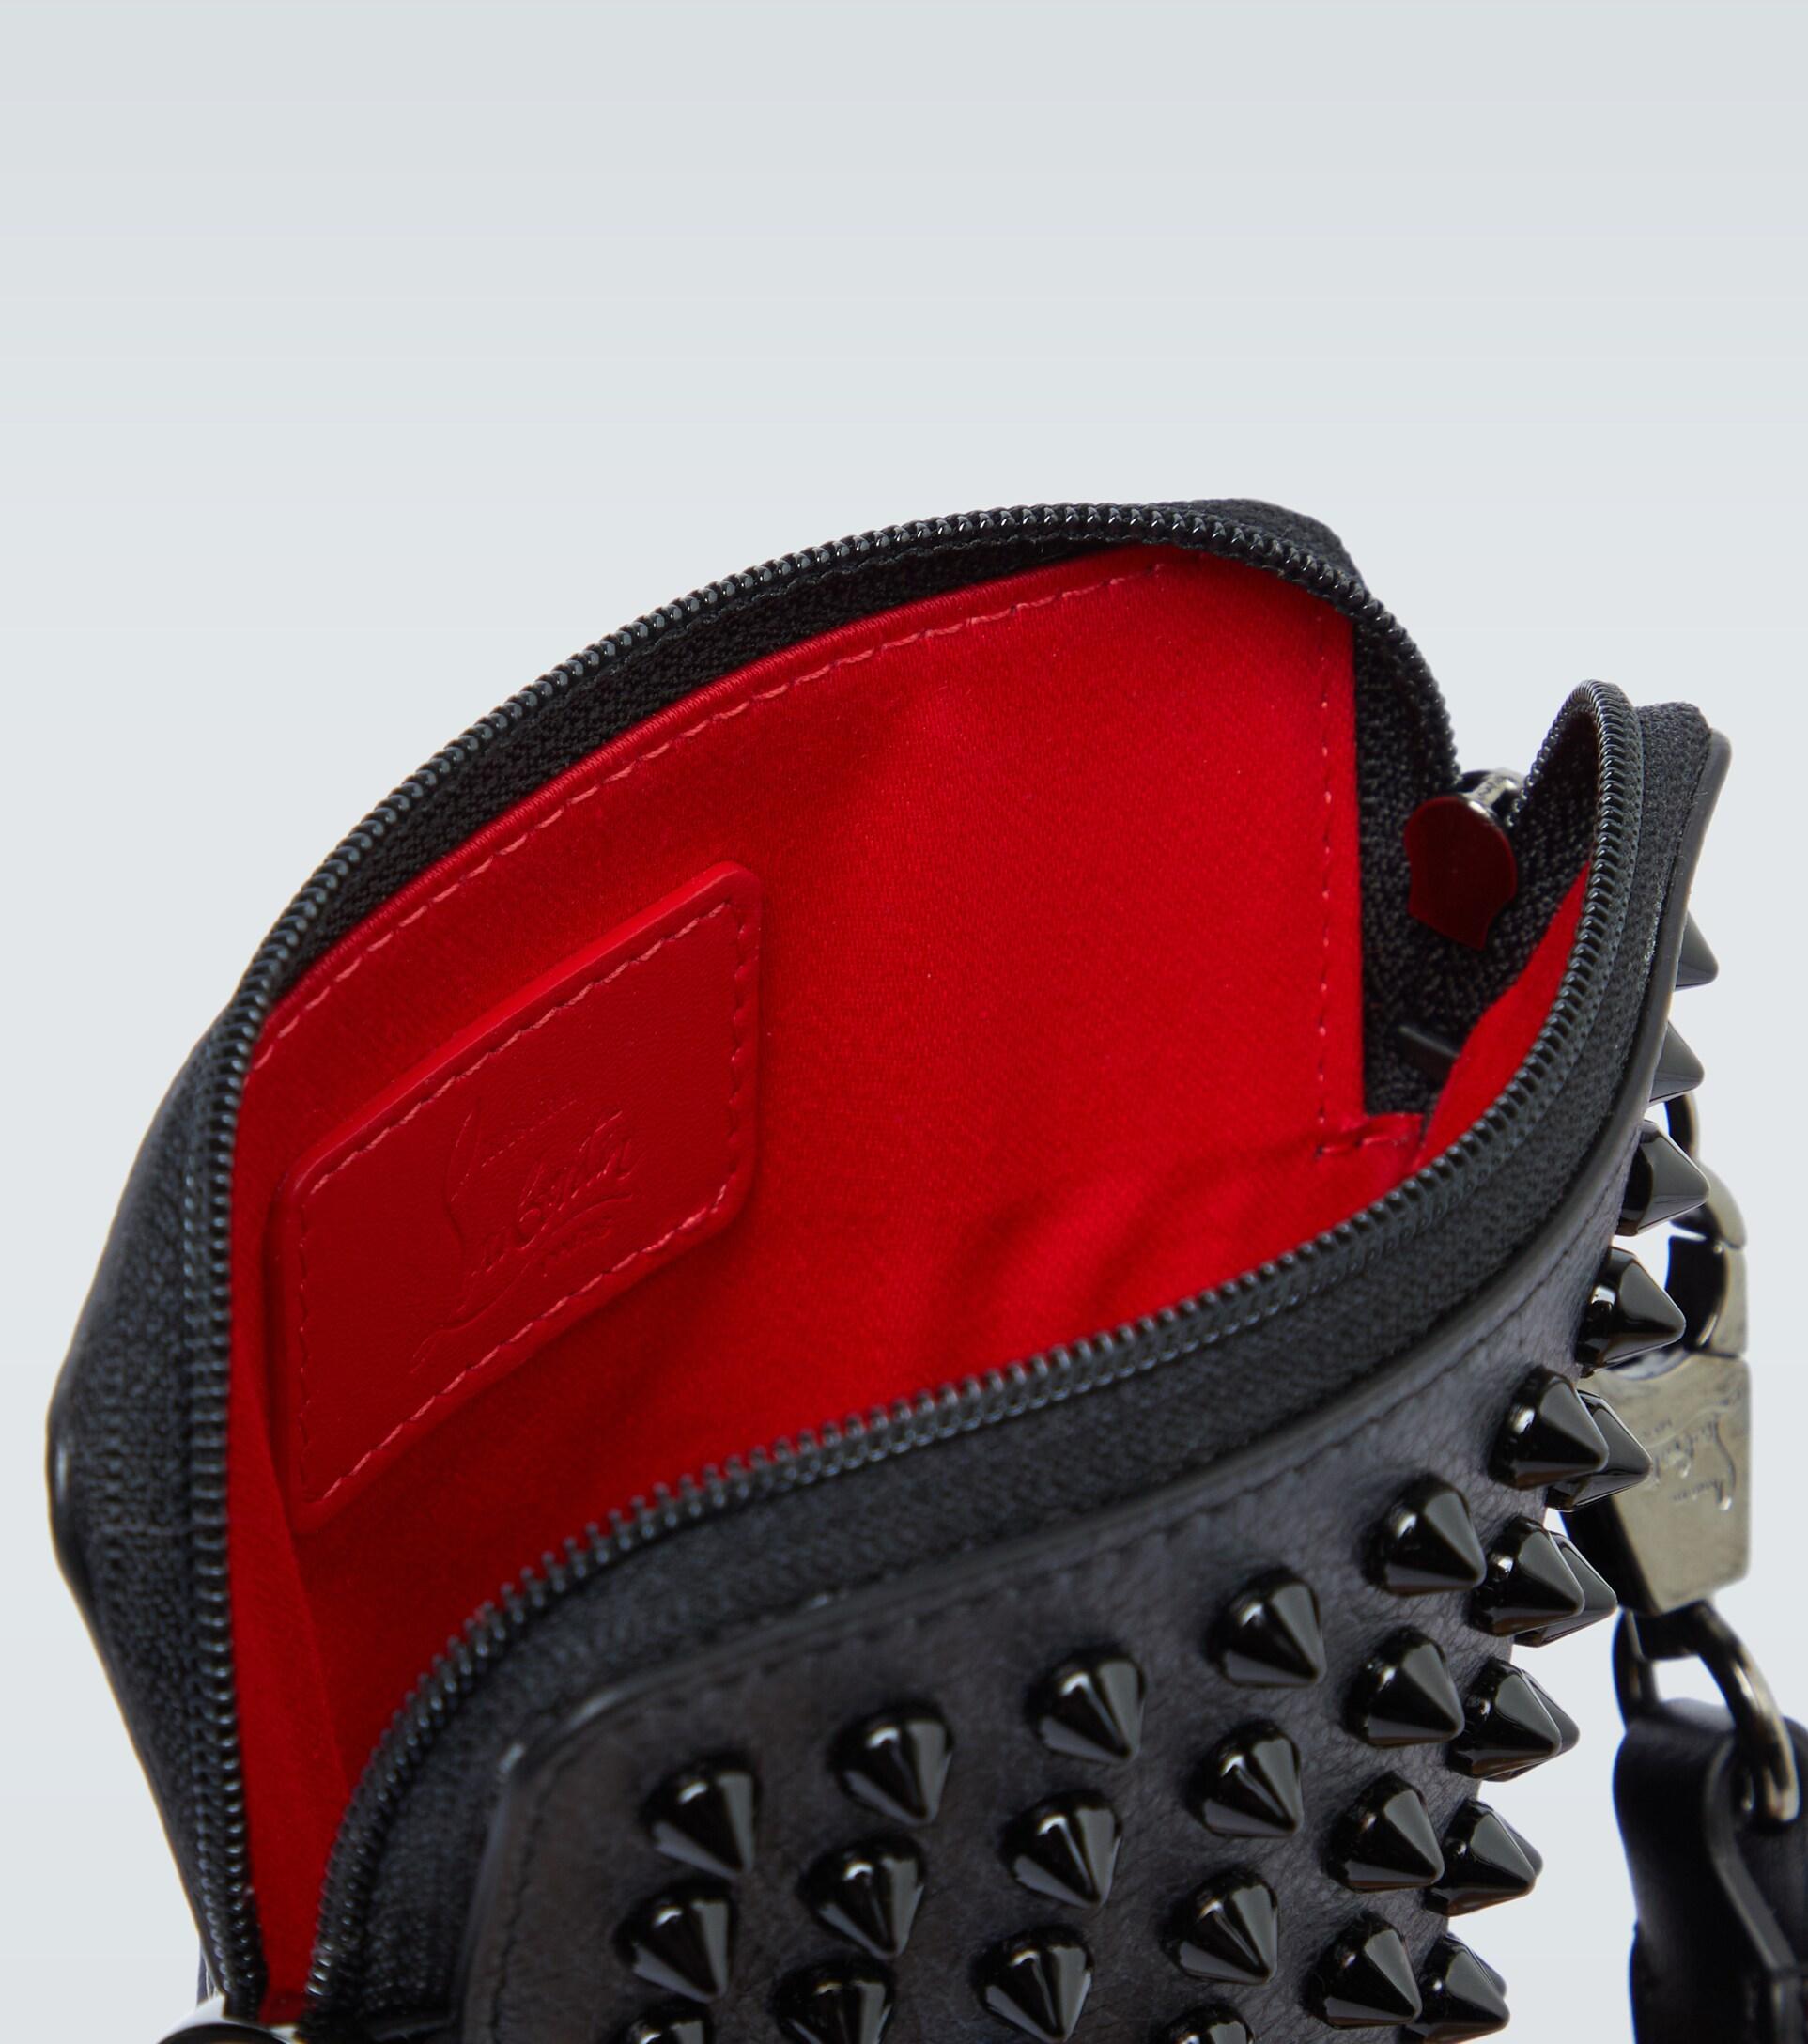 Christian Louboutin Trictrac Spikes Leather Bag in Brown for Men